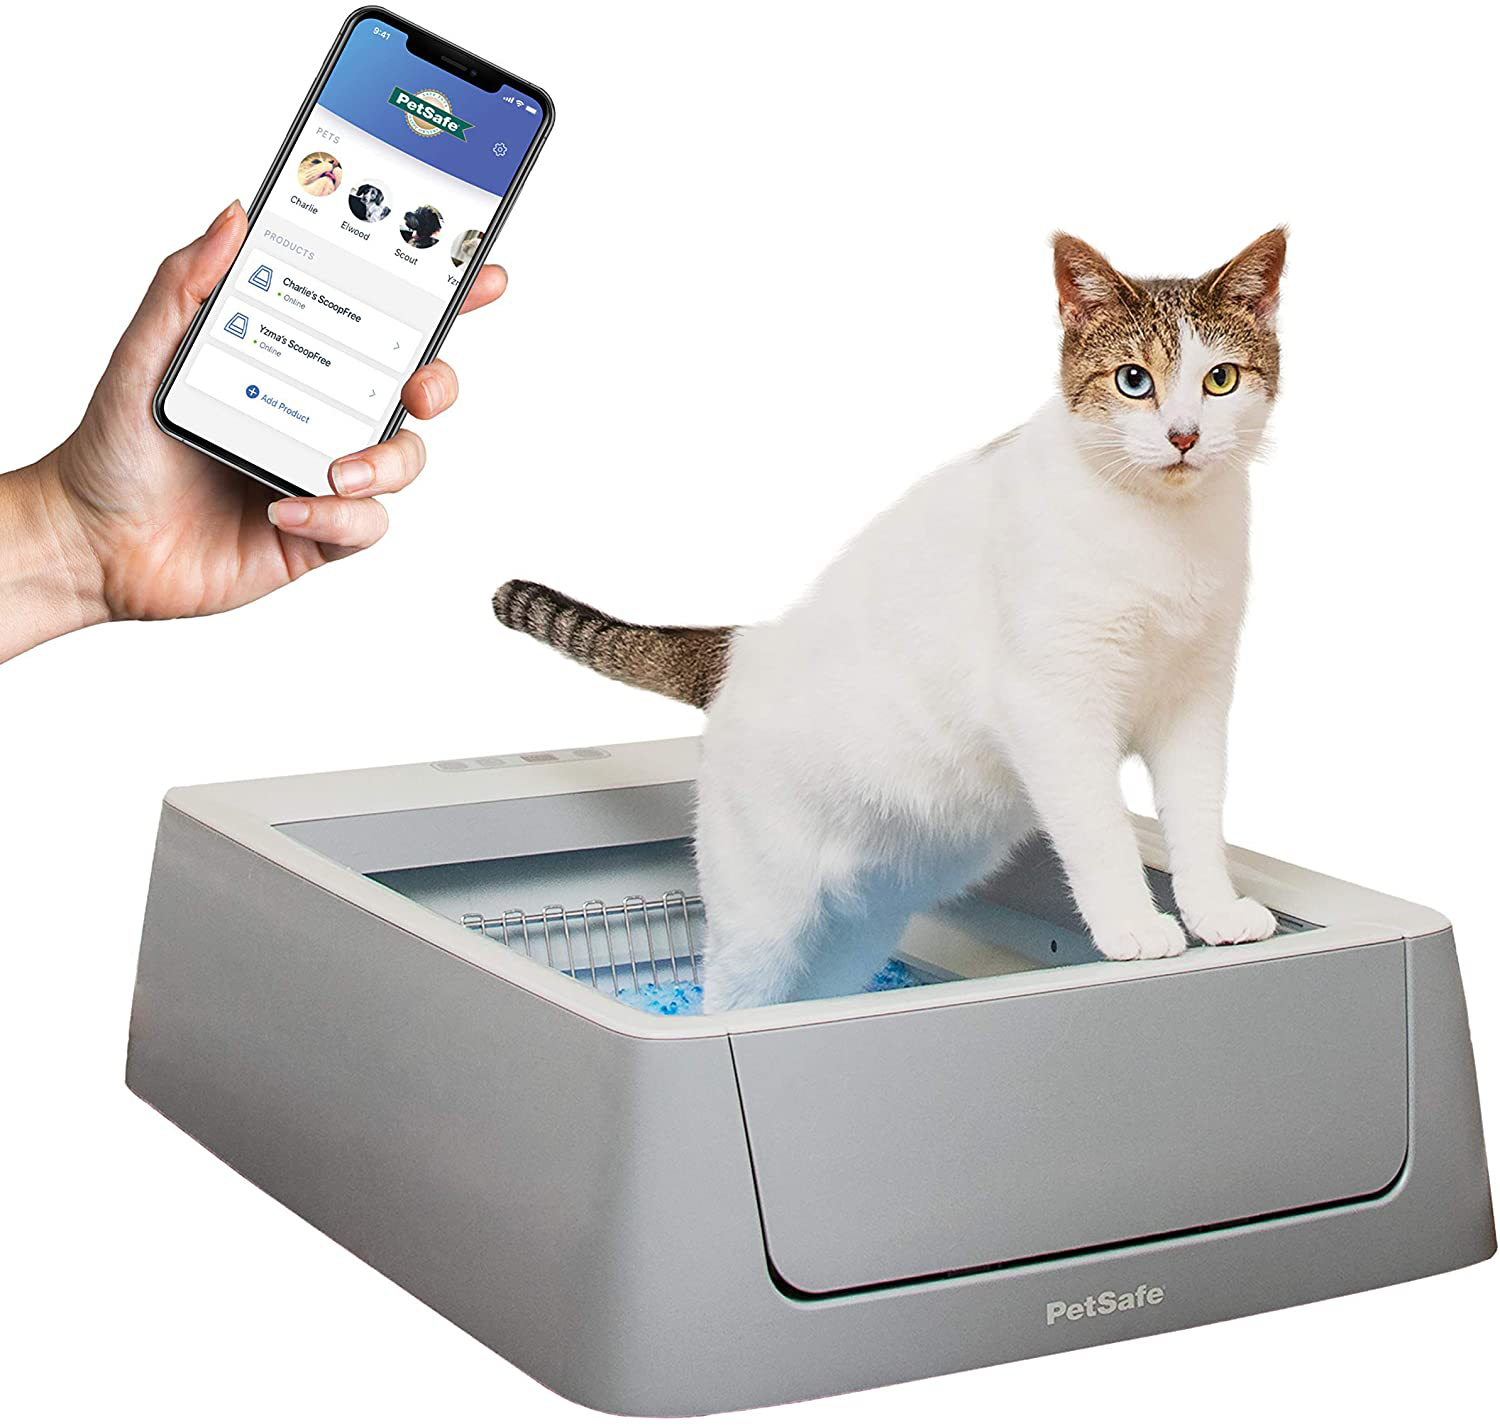 Petsafe Scoopfree Self Cleaning Cat Litter Box Systems - No More Scooping - 2Nd Generation or Smart Wifi Connected, Ios/Android App with Health Counter - Automatic Cat Litter Box, Crystal Cat Litter